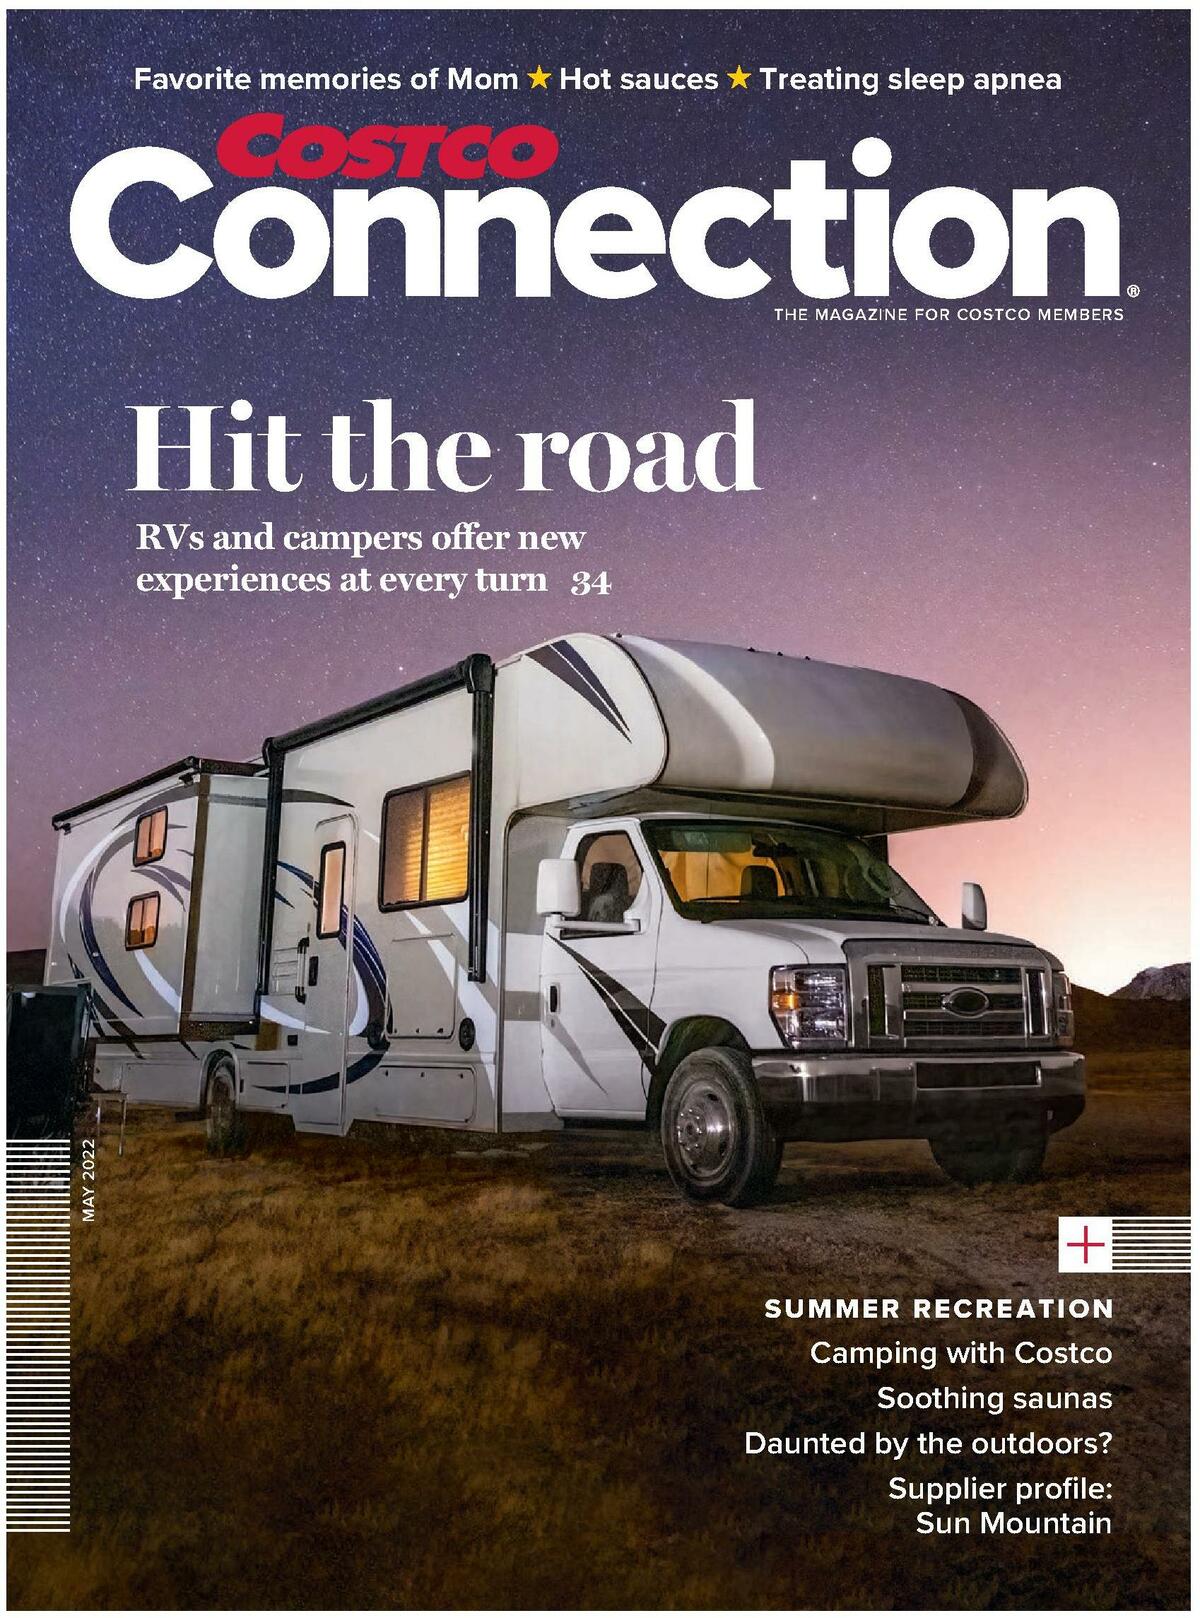 Costco Connection May Special Buys and Warehouse Savings from May 1